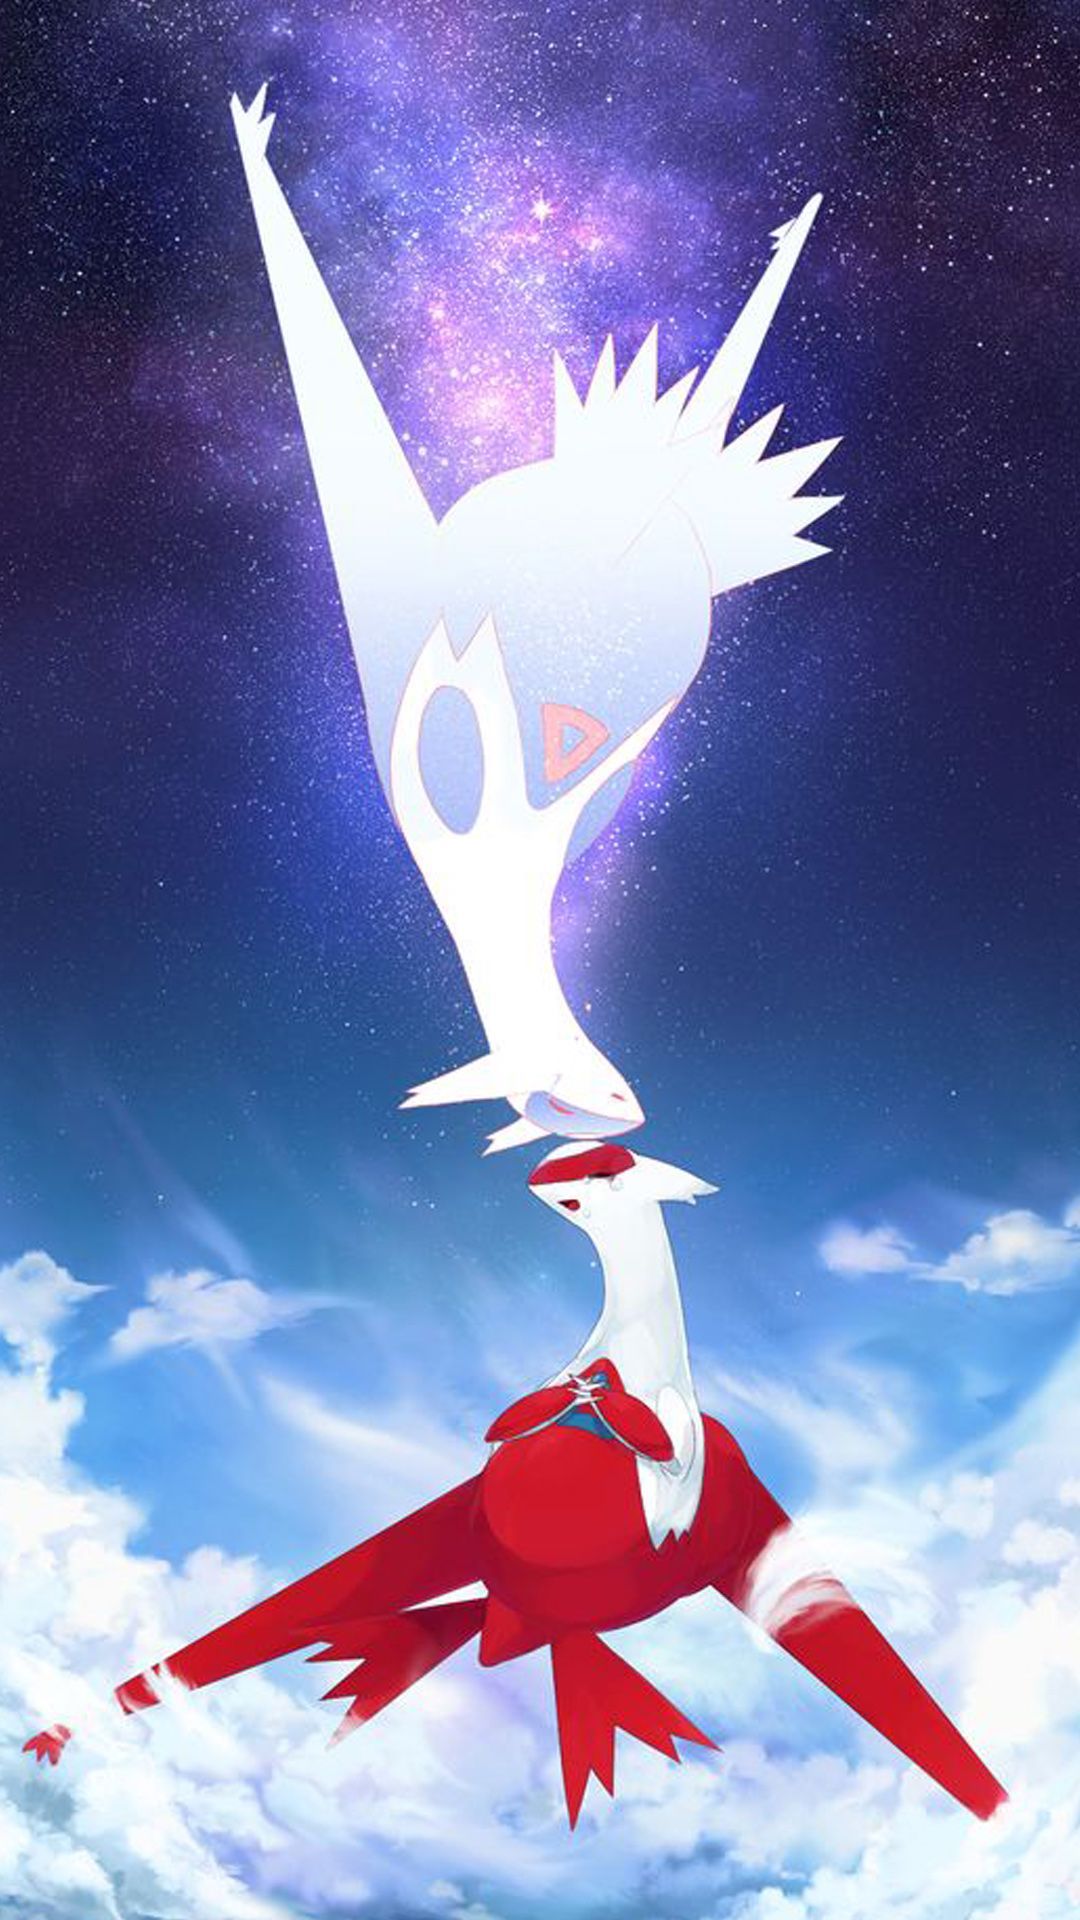 3D Picture For Your Android or iPhone Wallpaper #android #iphone # wallpaper. Pokemon latias, Pokemon, Pokemon background